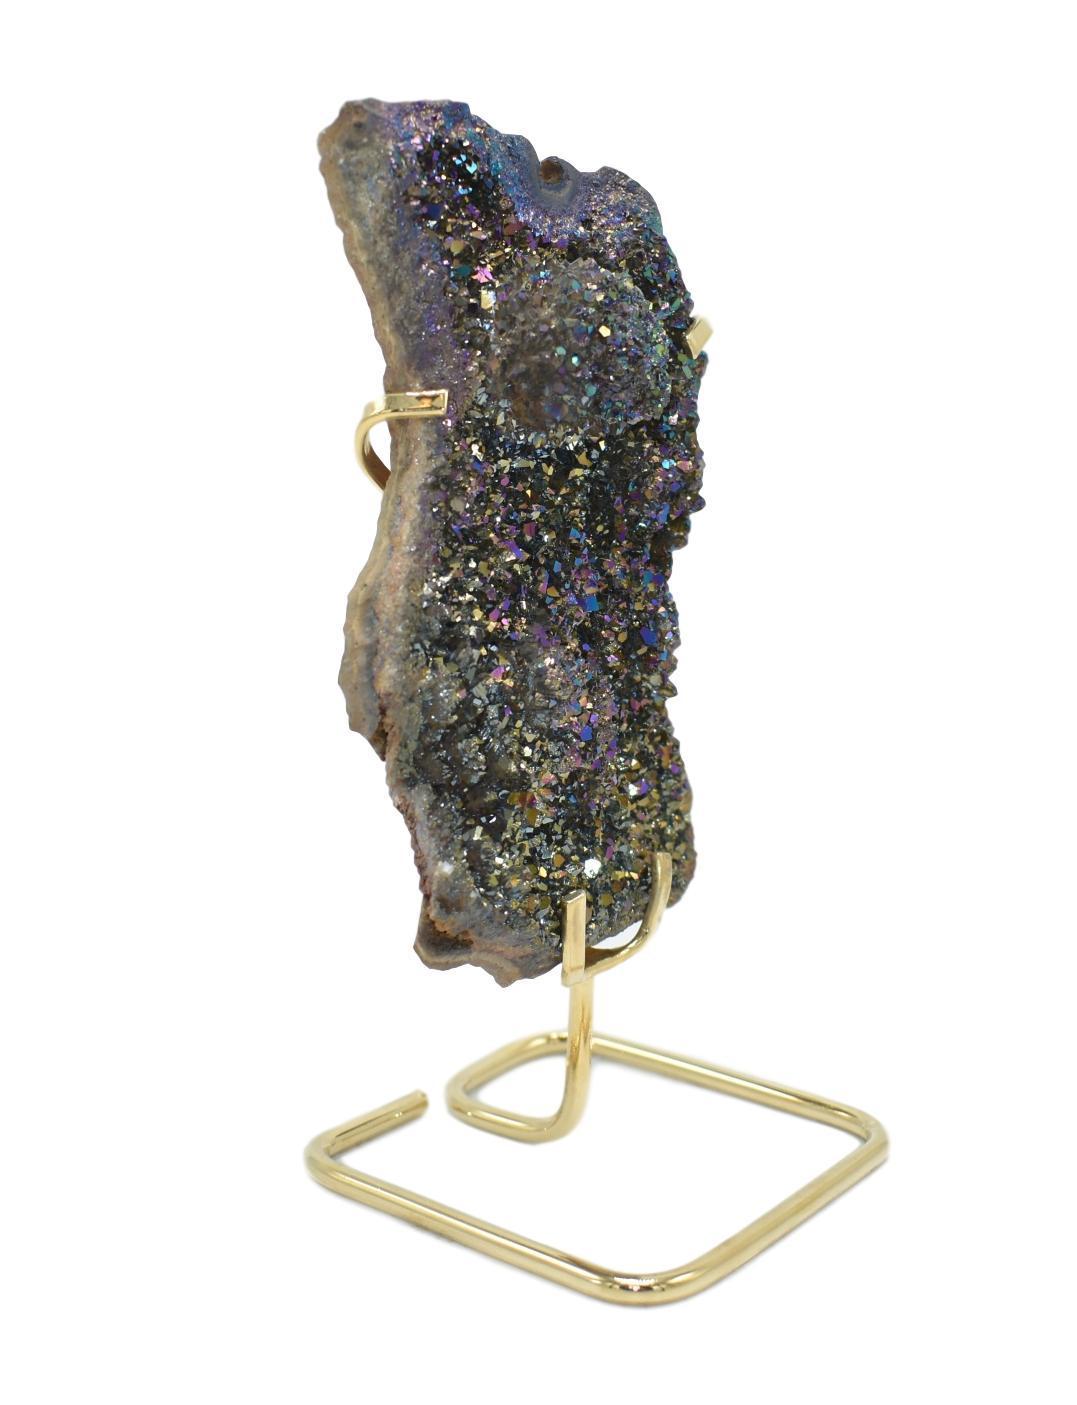 Metalized Amethyst Cluster on Wire Stand Green Ares